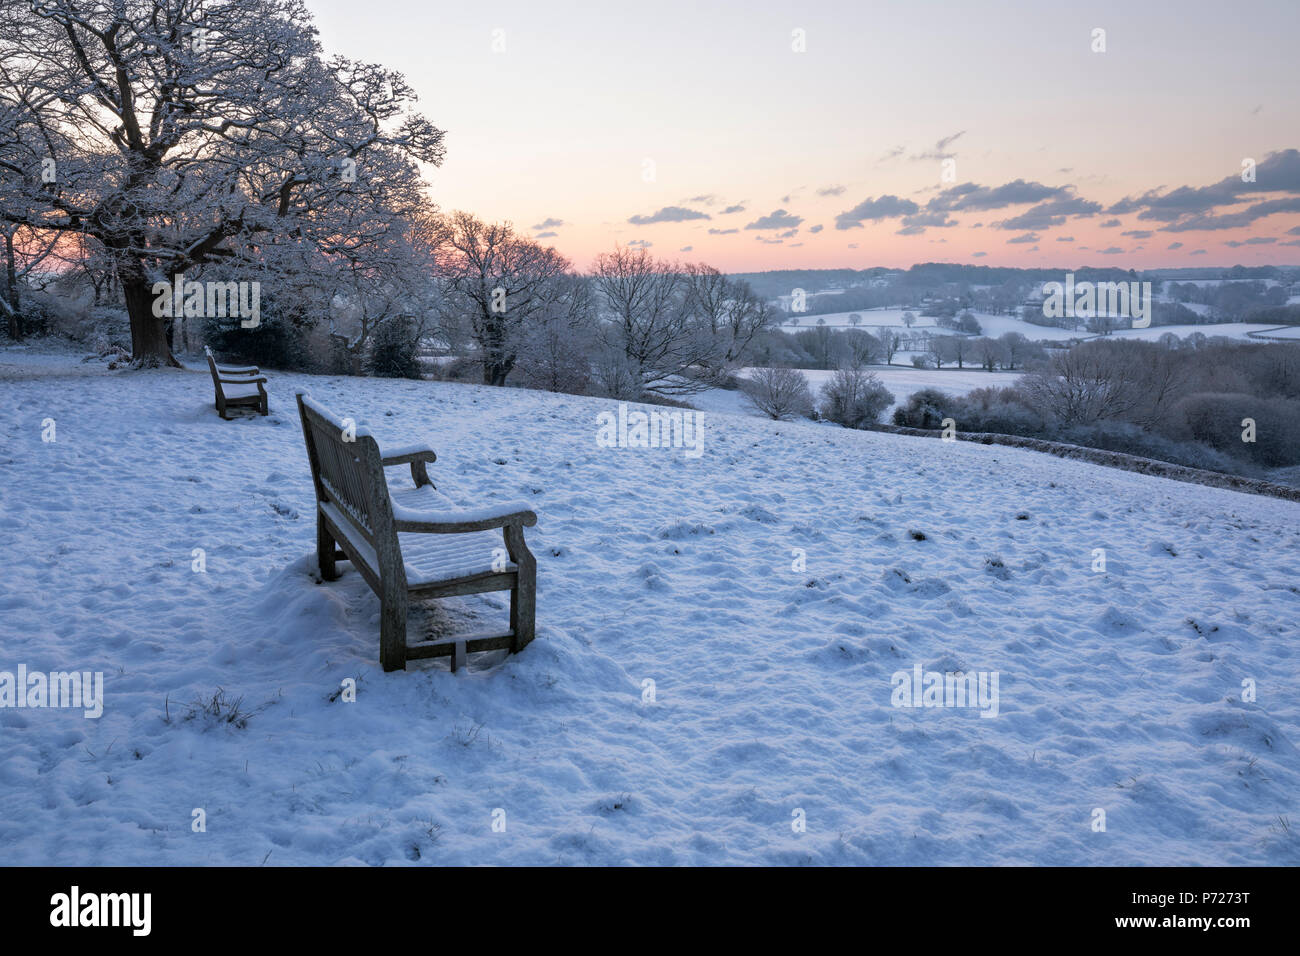 Bench overlooking snow covered High Weald landscape at sunrise, Burwash, East Sussex, England, United Kingdom, Europe Stock Photo